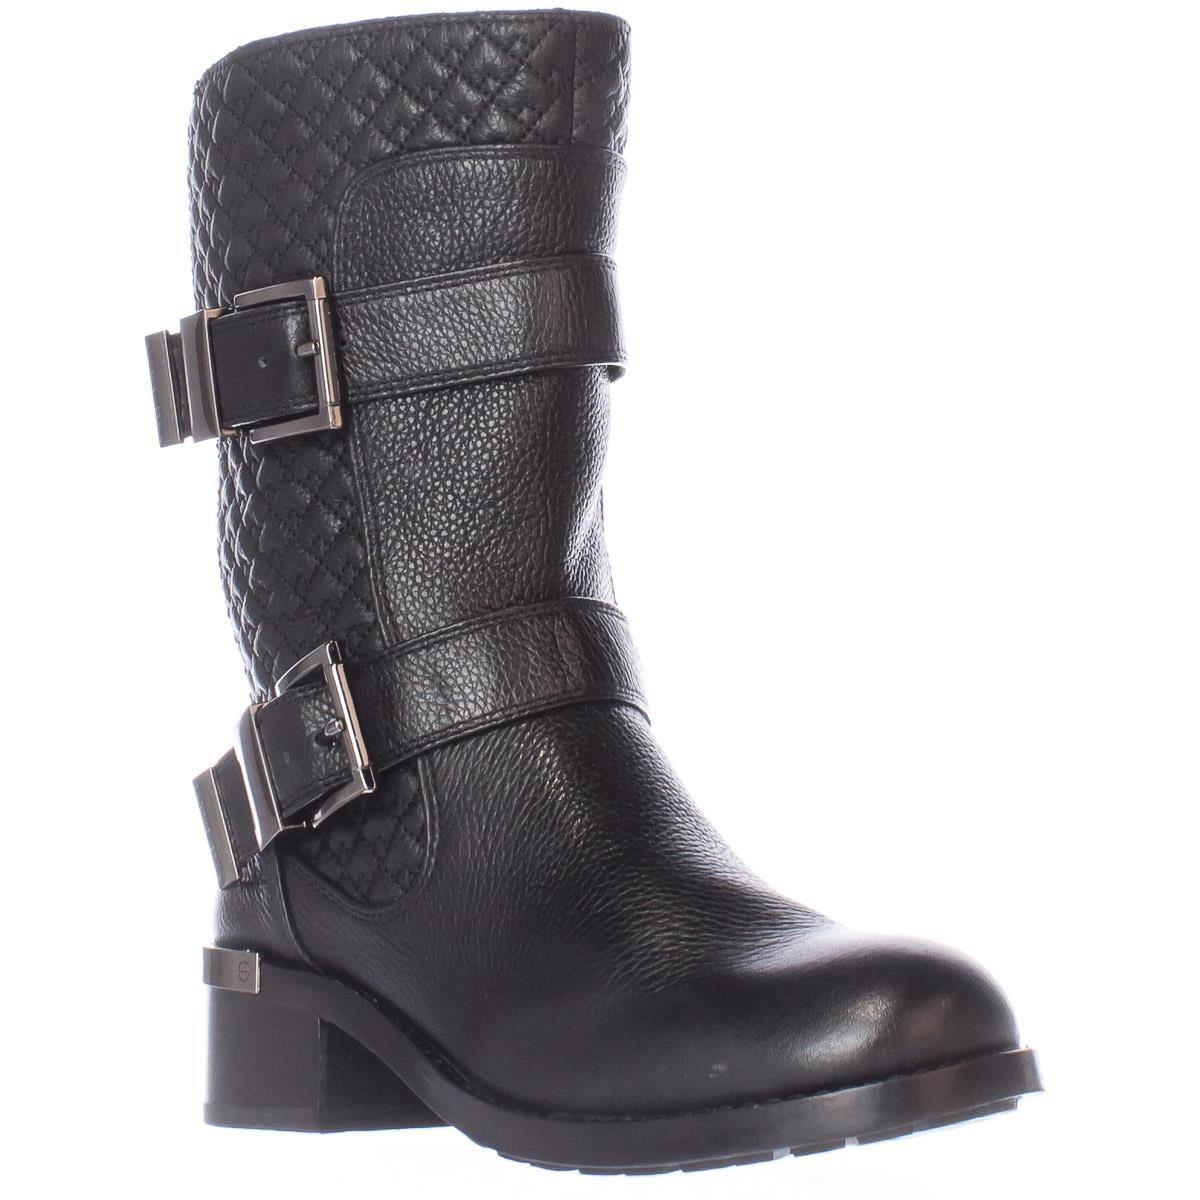 Vince camuto Welton Quilted Mid Calf Motorcycle Boots in